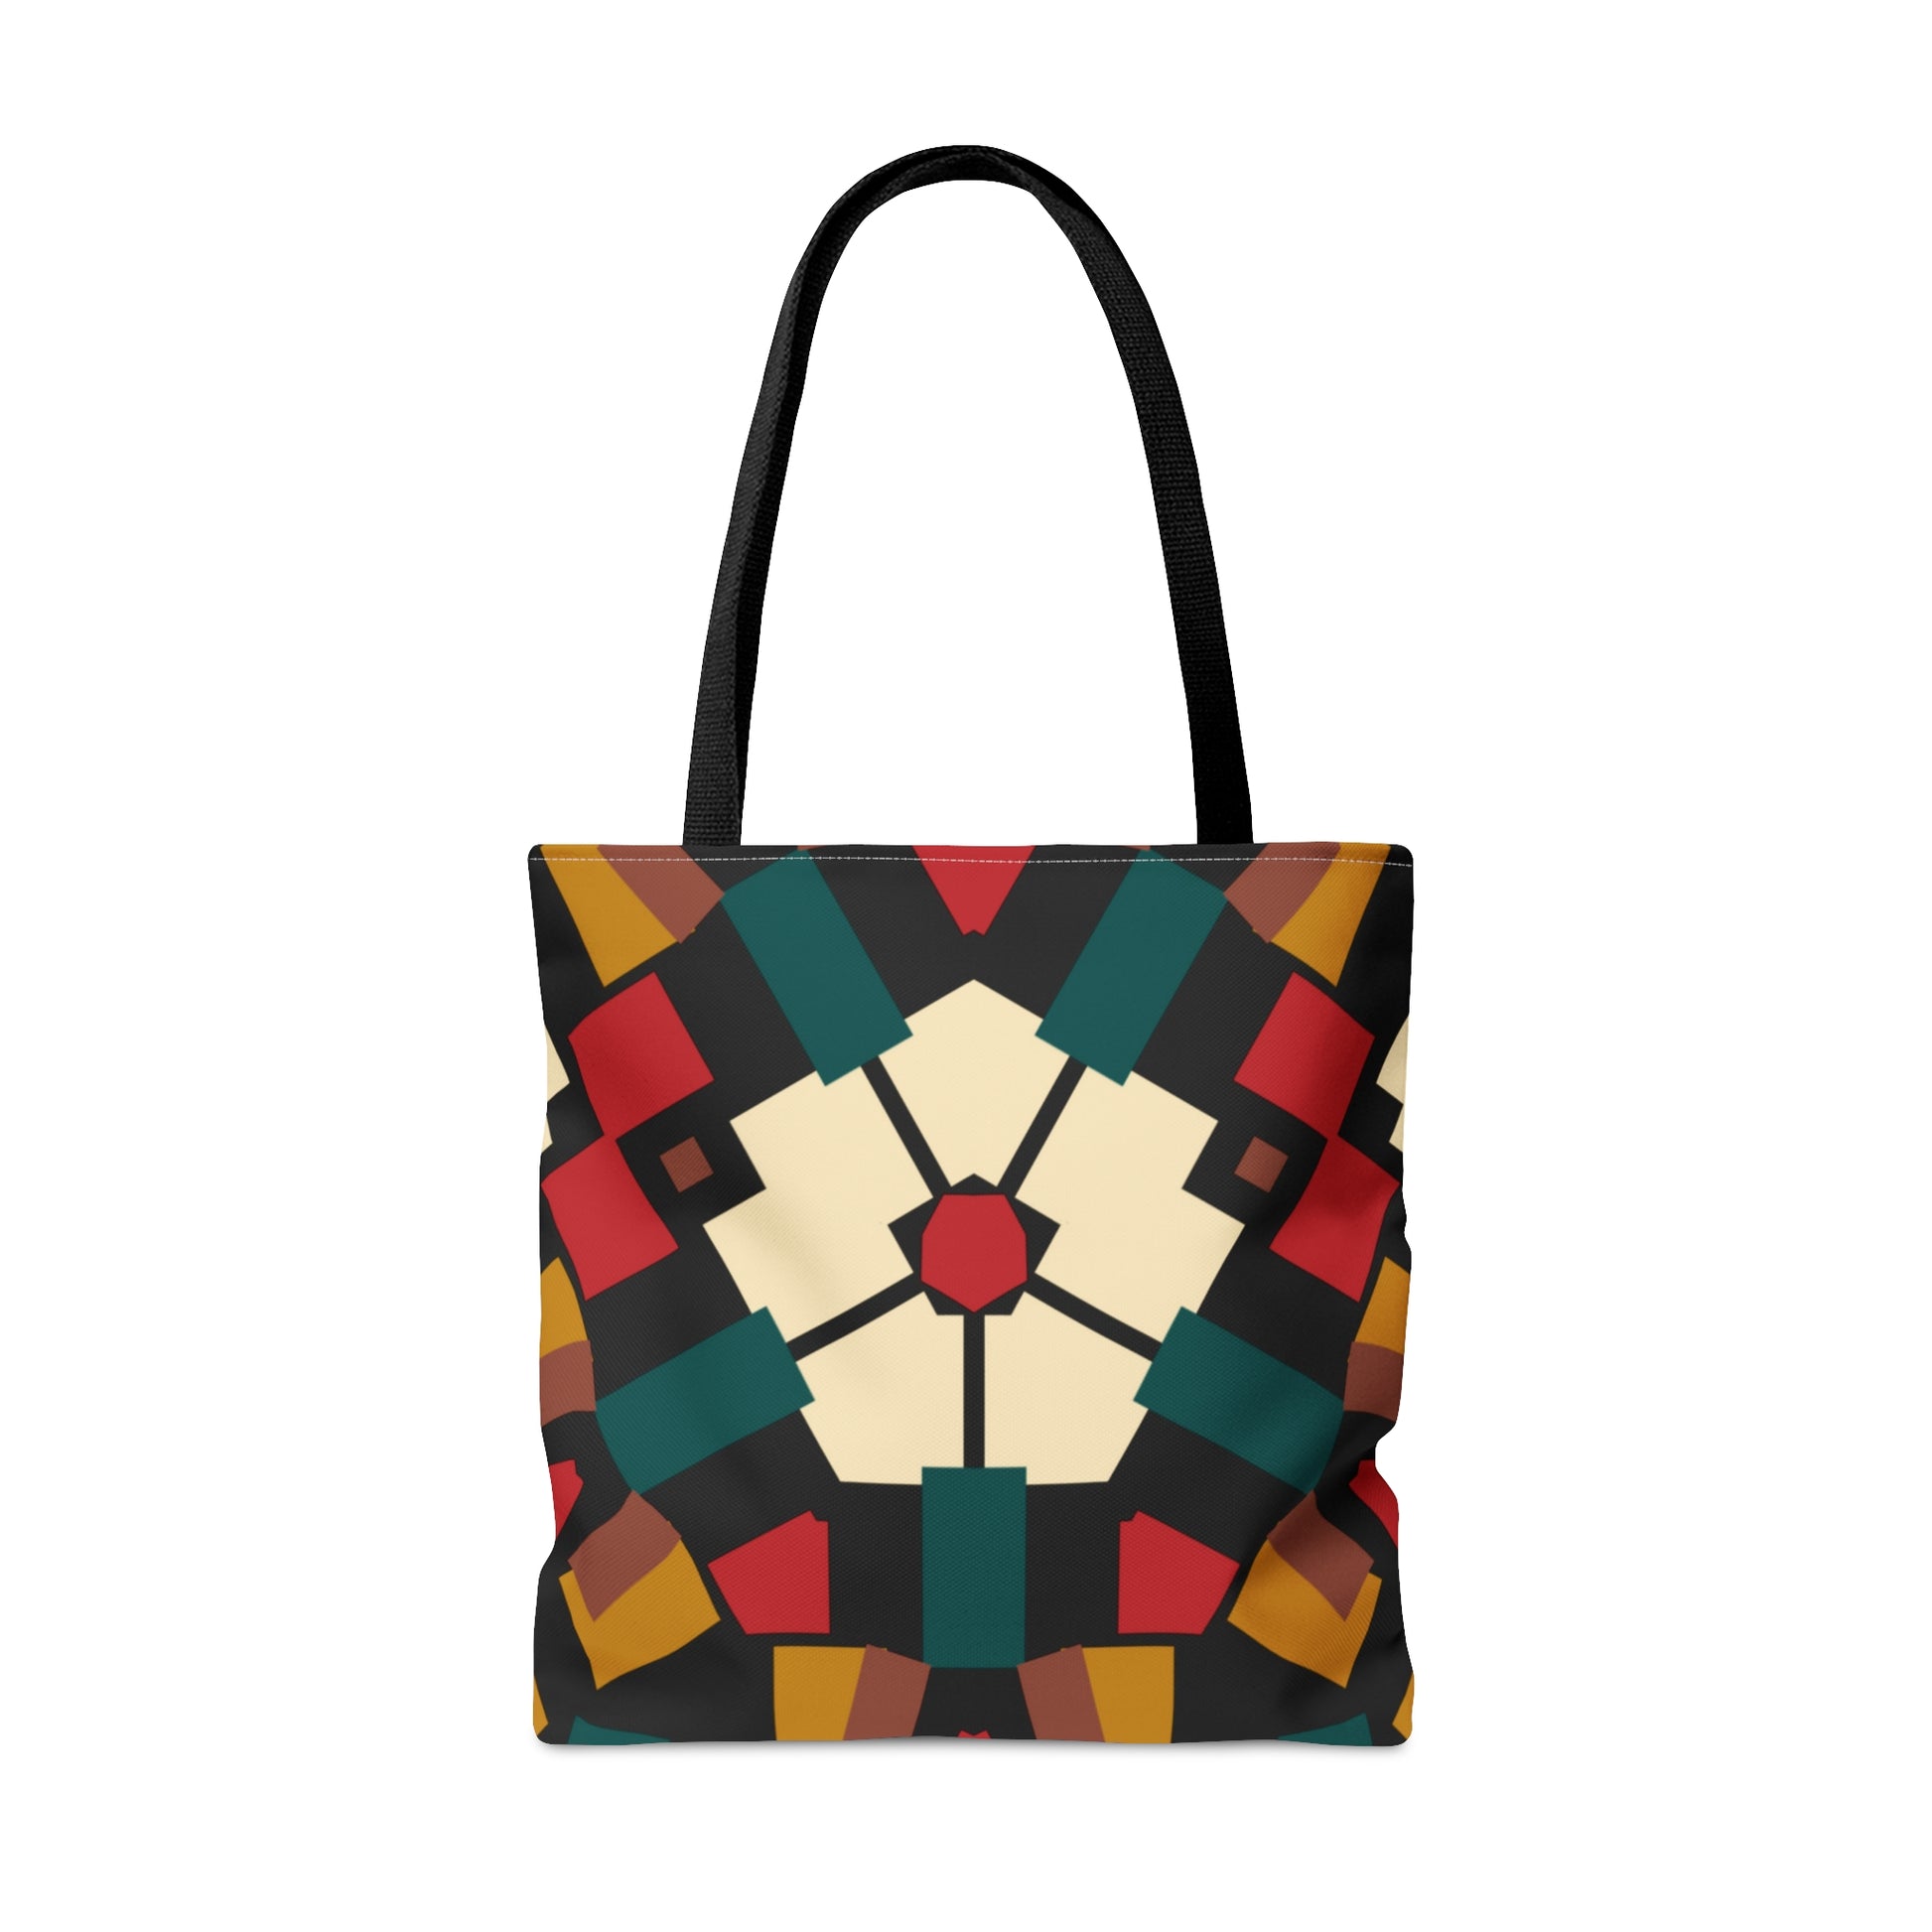 Afro-Floral Fusion Tote Bag with a striking white abstract flower on an Afrocentric patterned background, featuring black handles and durable polyester construction.